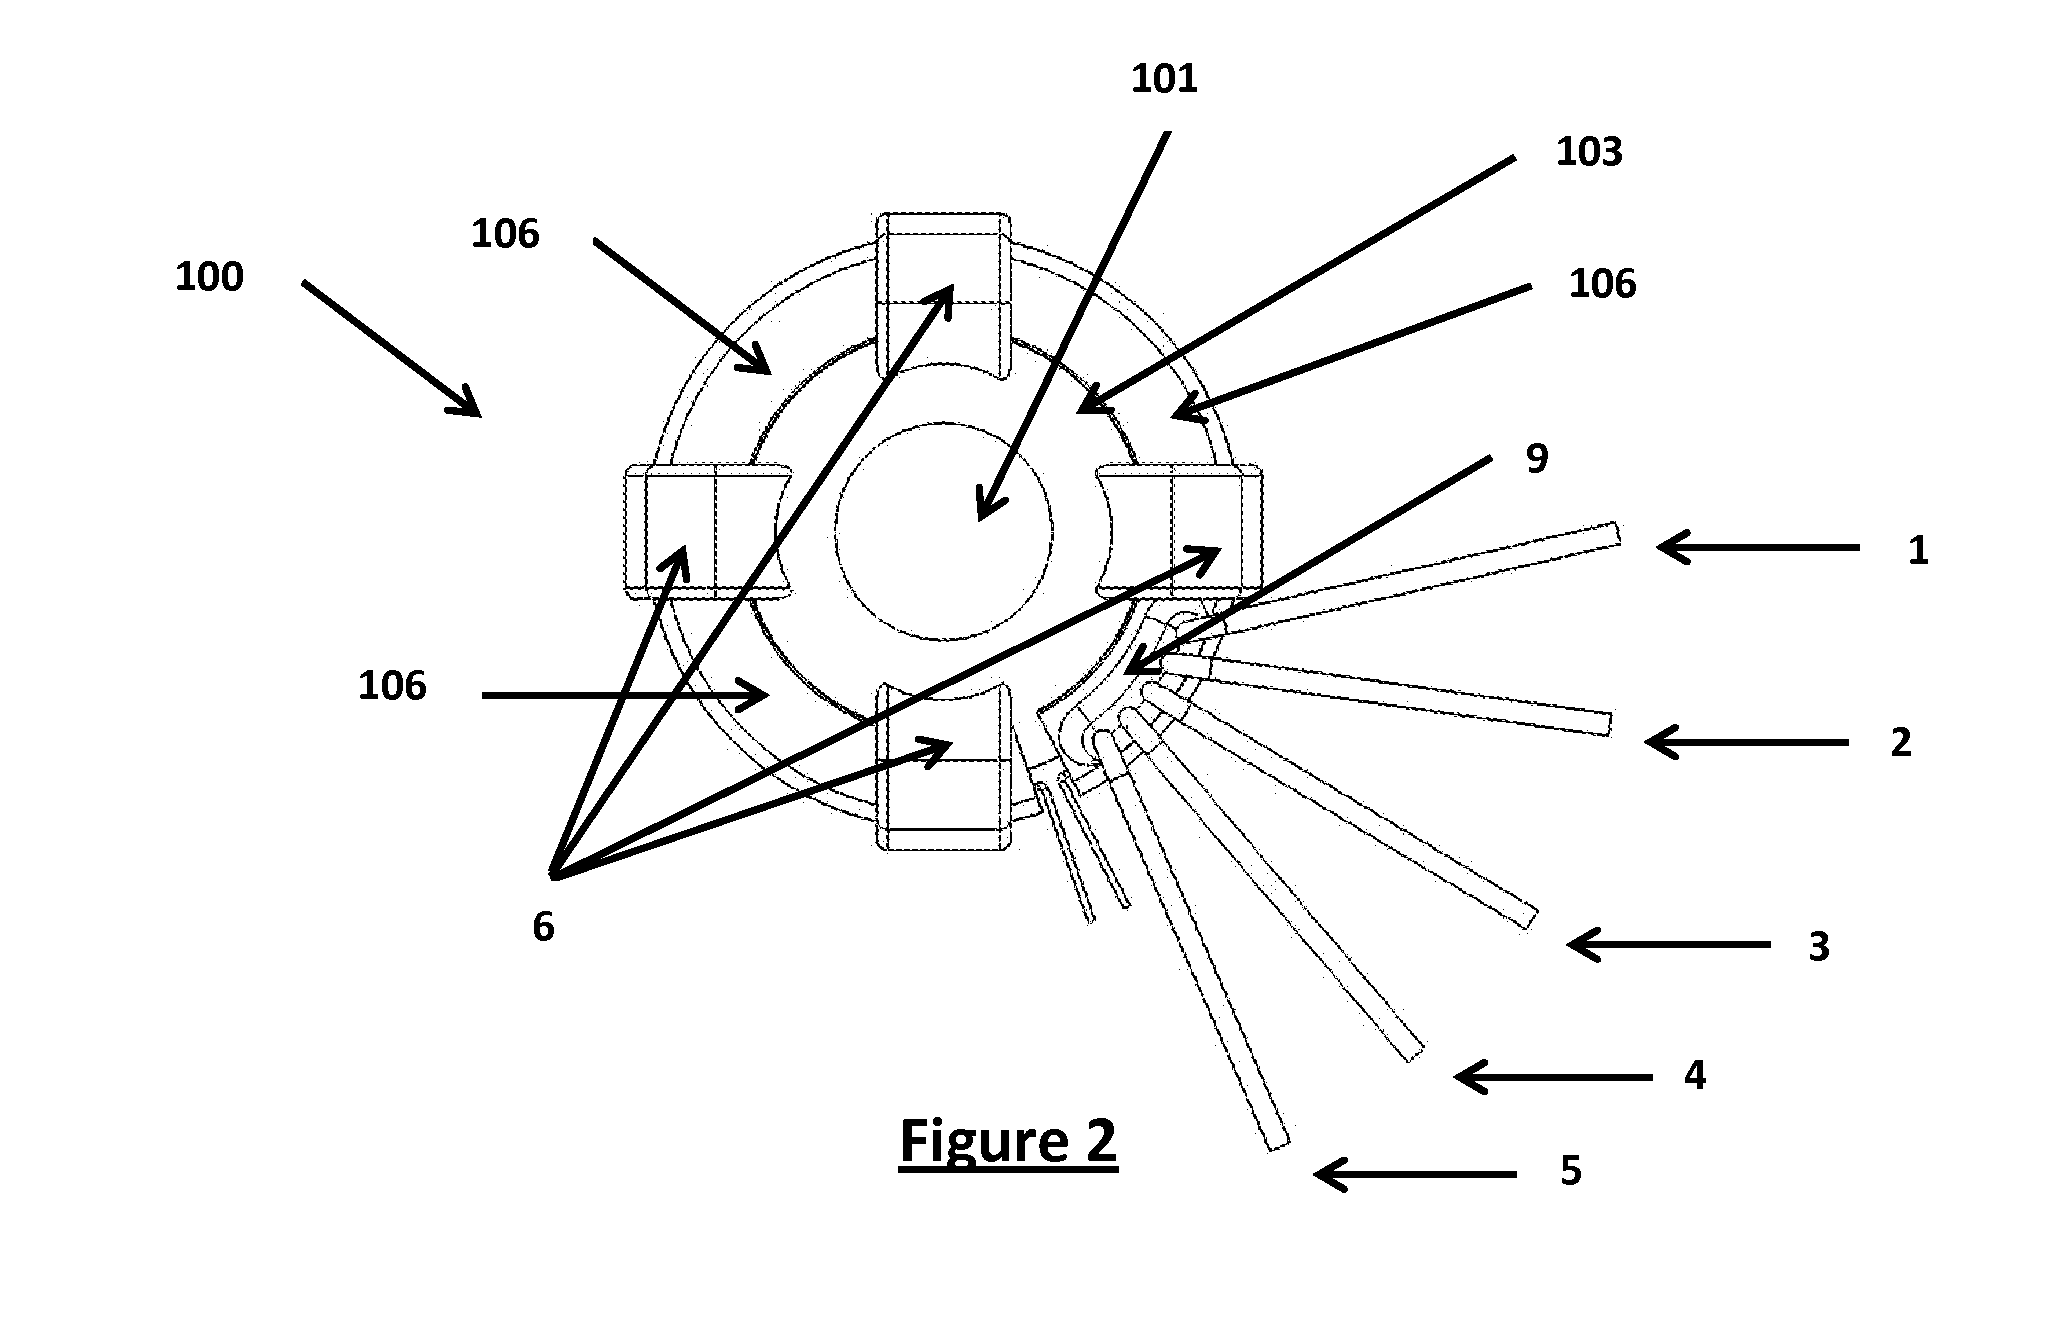 Method and apparatus for the delivery of photochemical (cross-linking) treatment to scleral tissue